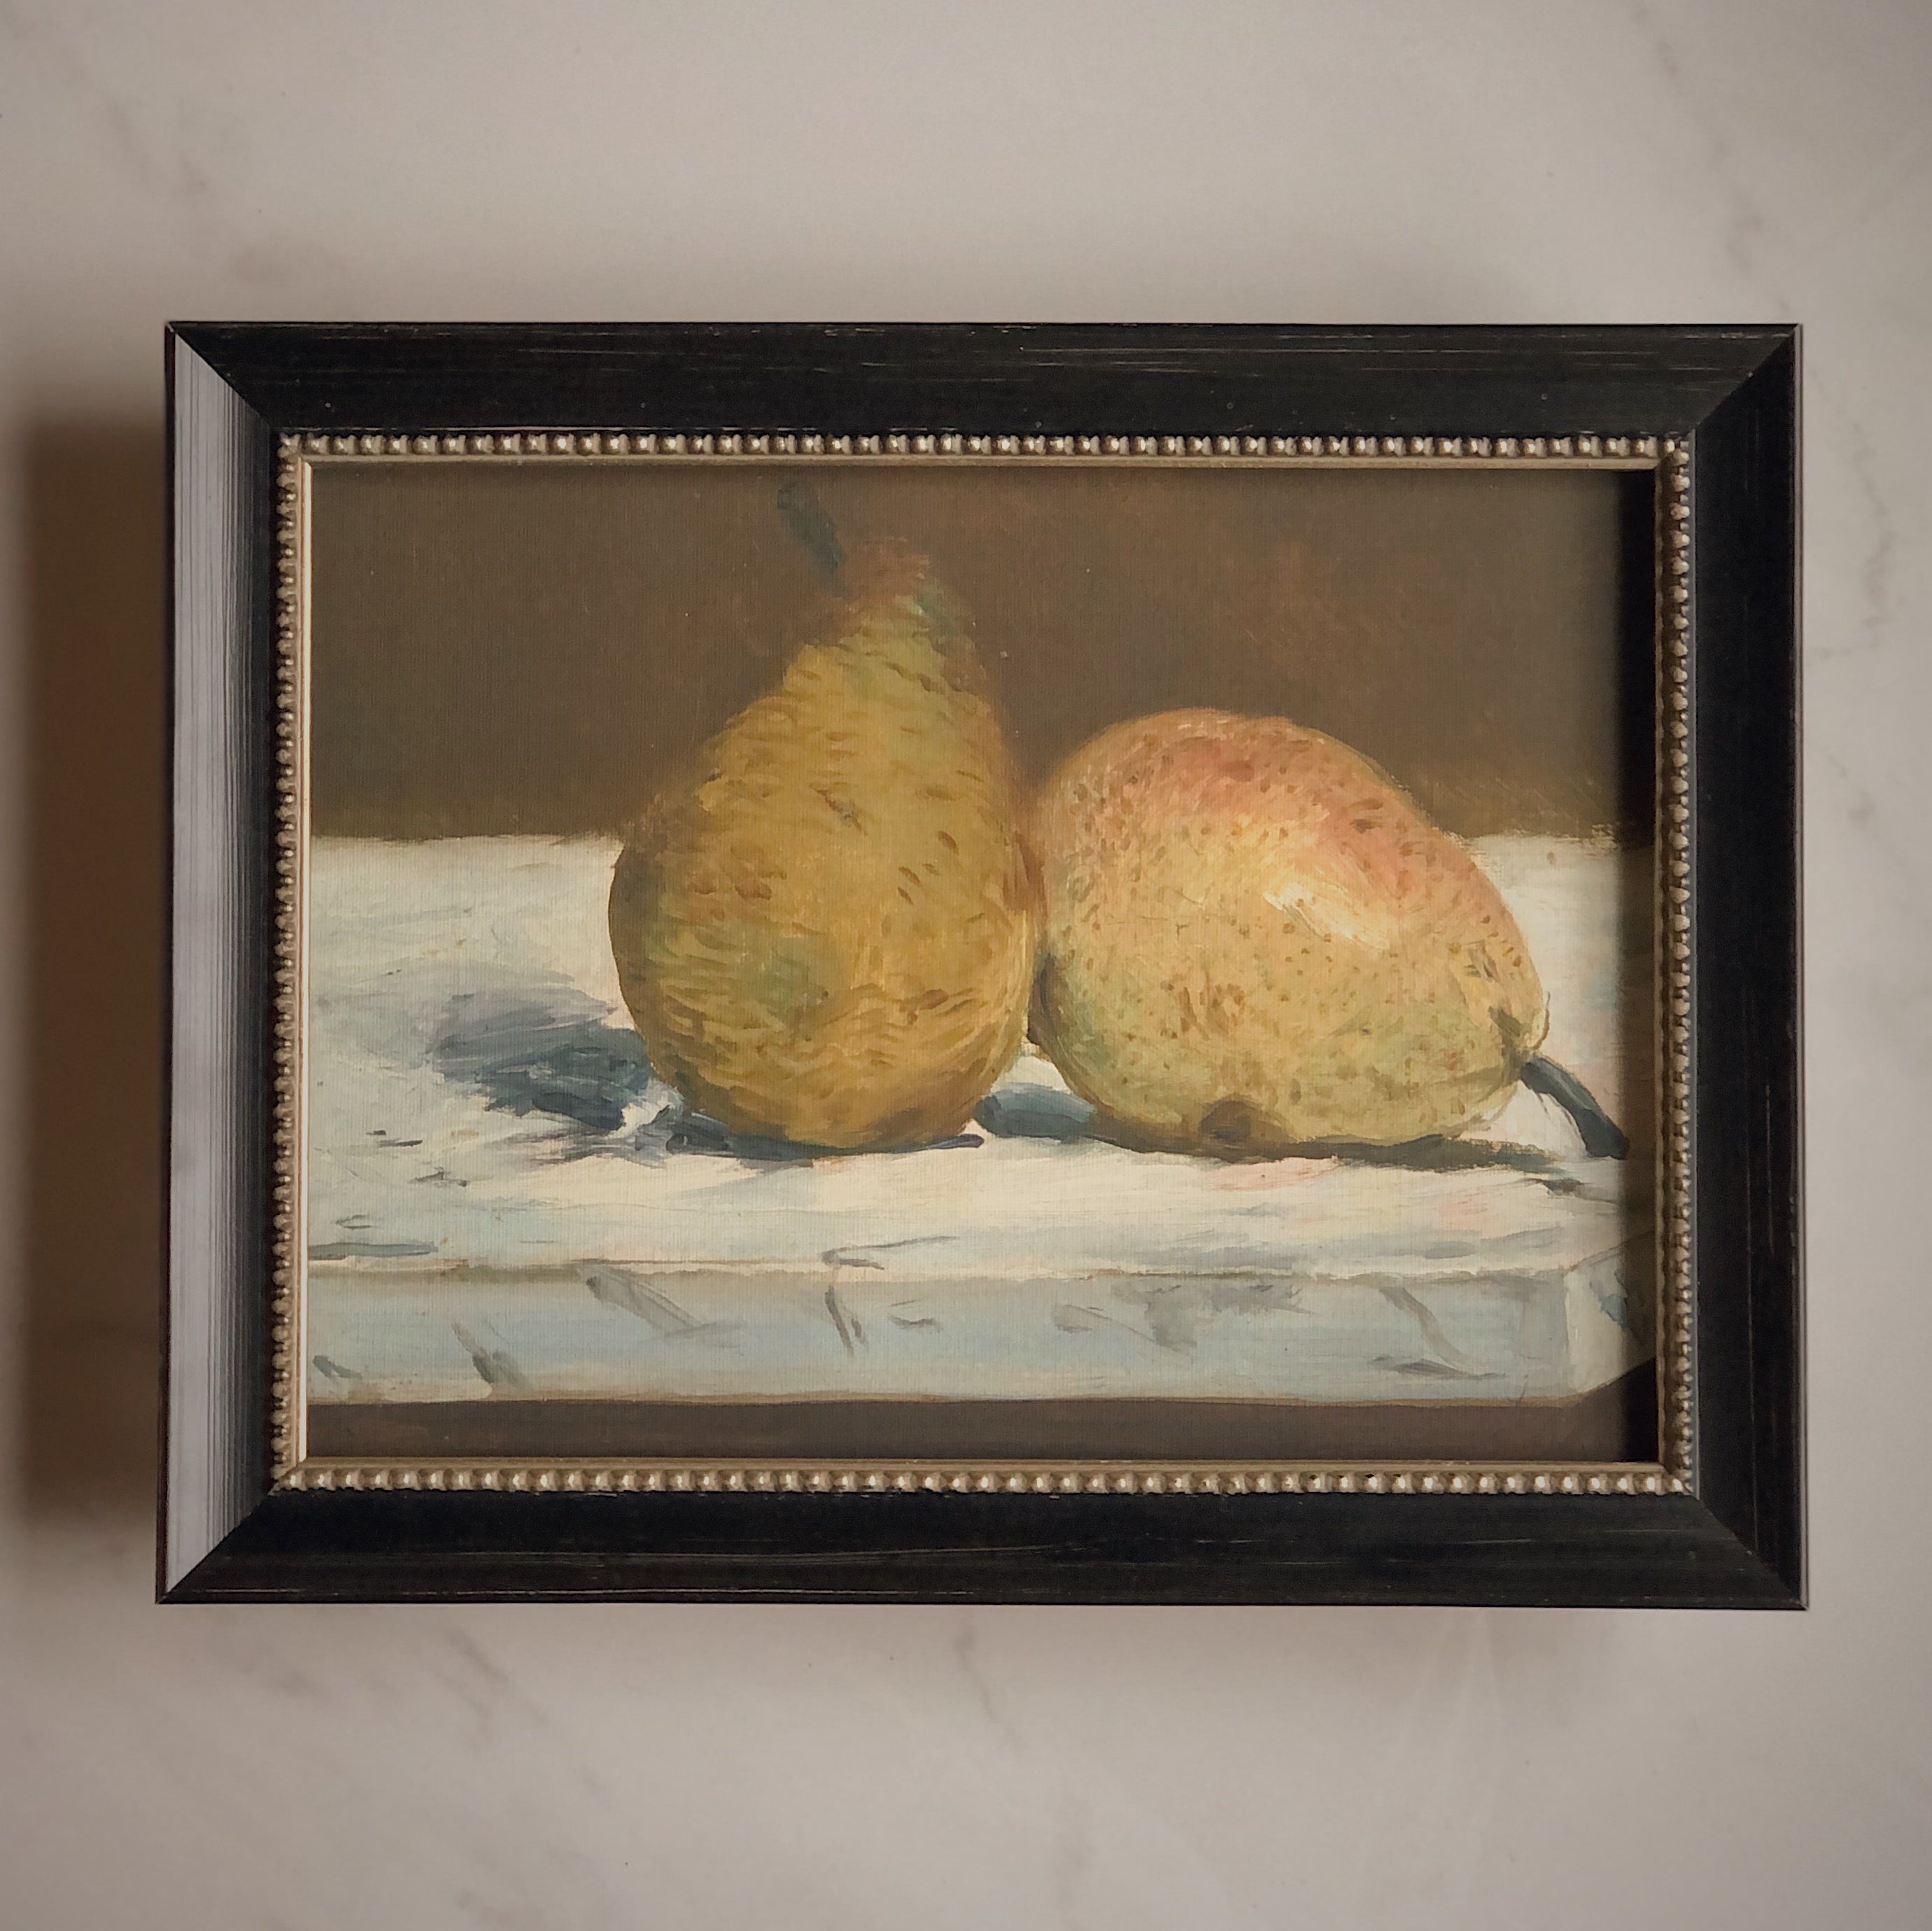 STRETCHED FLAT RIGID CANVAS - VINTAGE PEARS